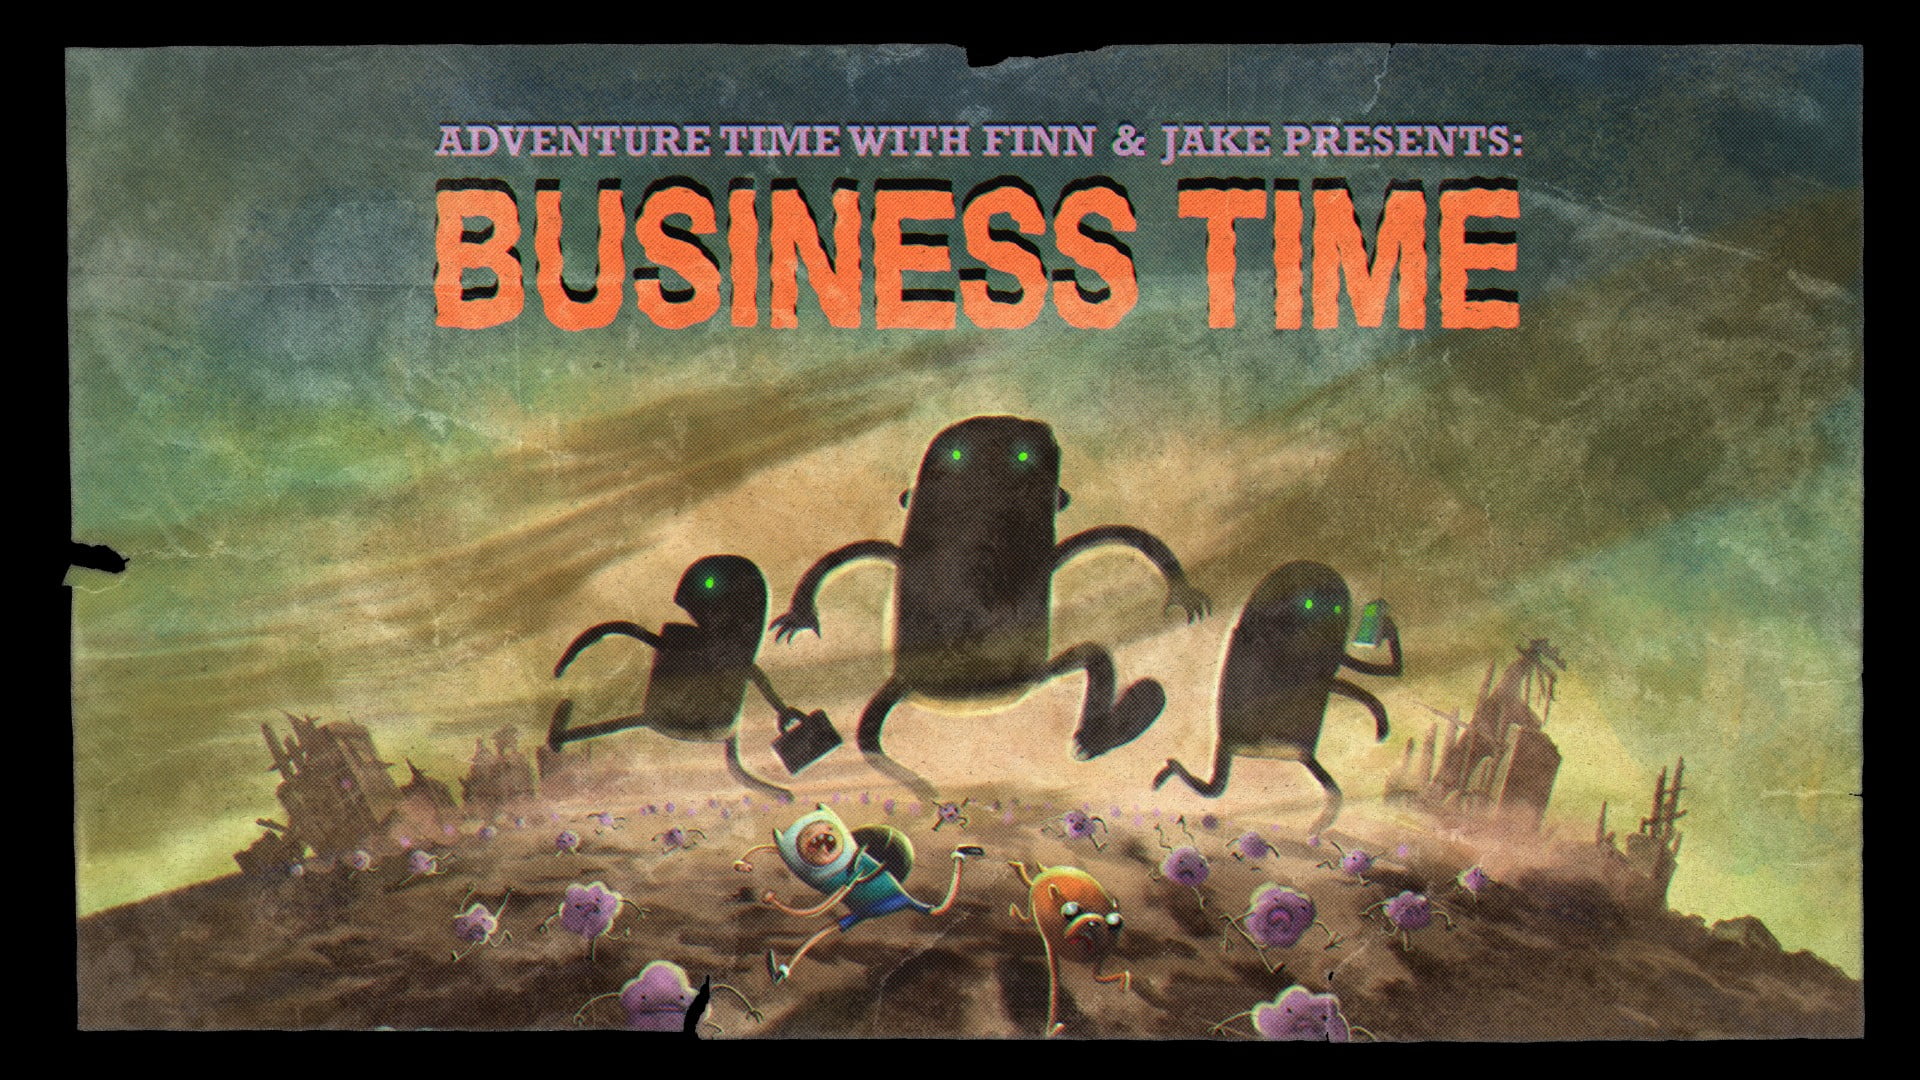 Business time text, Adventure Time, Finn the Human, Jake the Dog